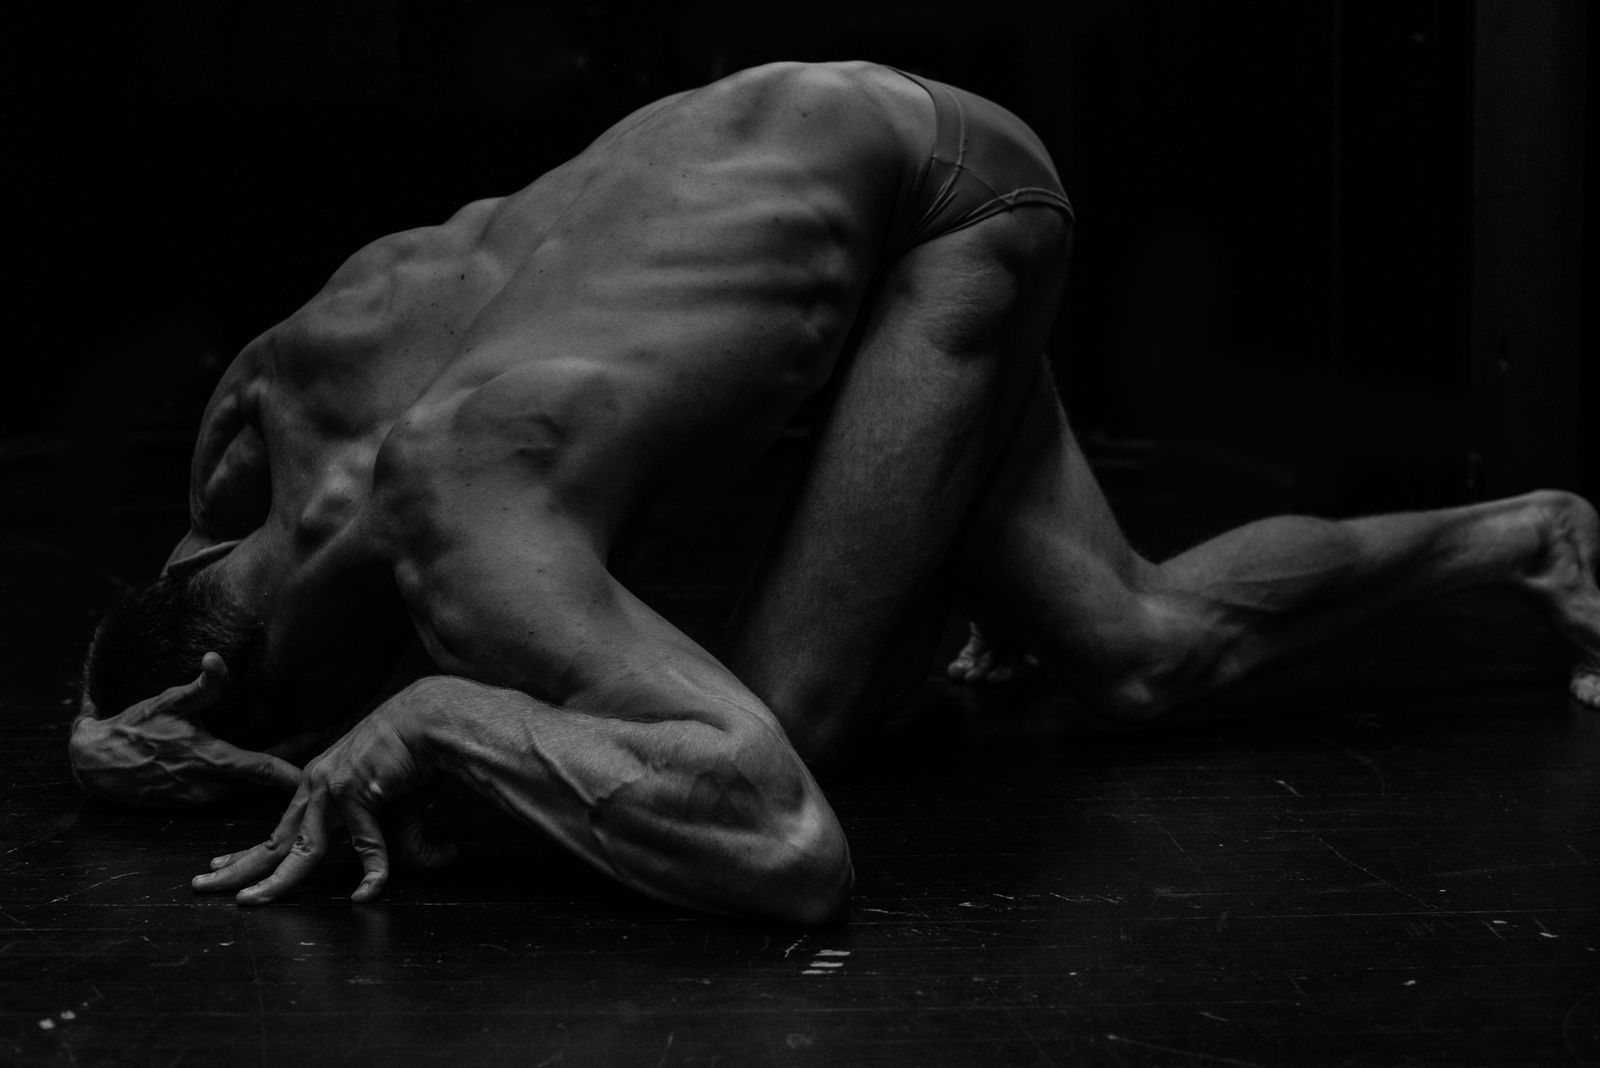 © Mikko Rasila - Image from the Dance photography project